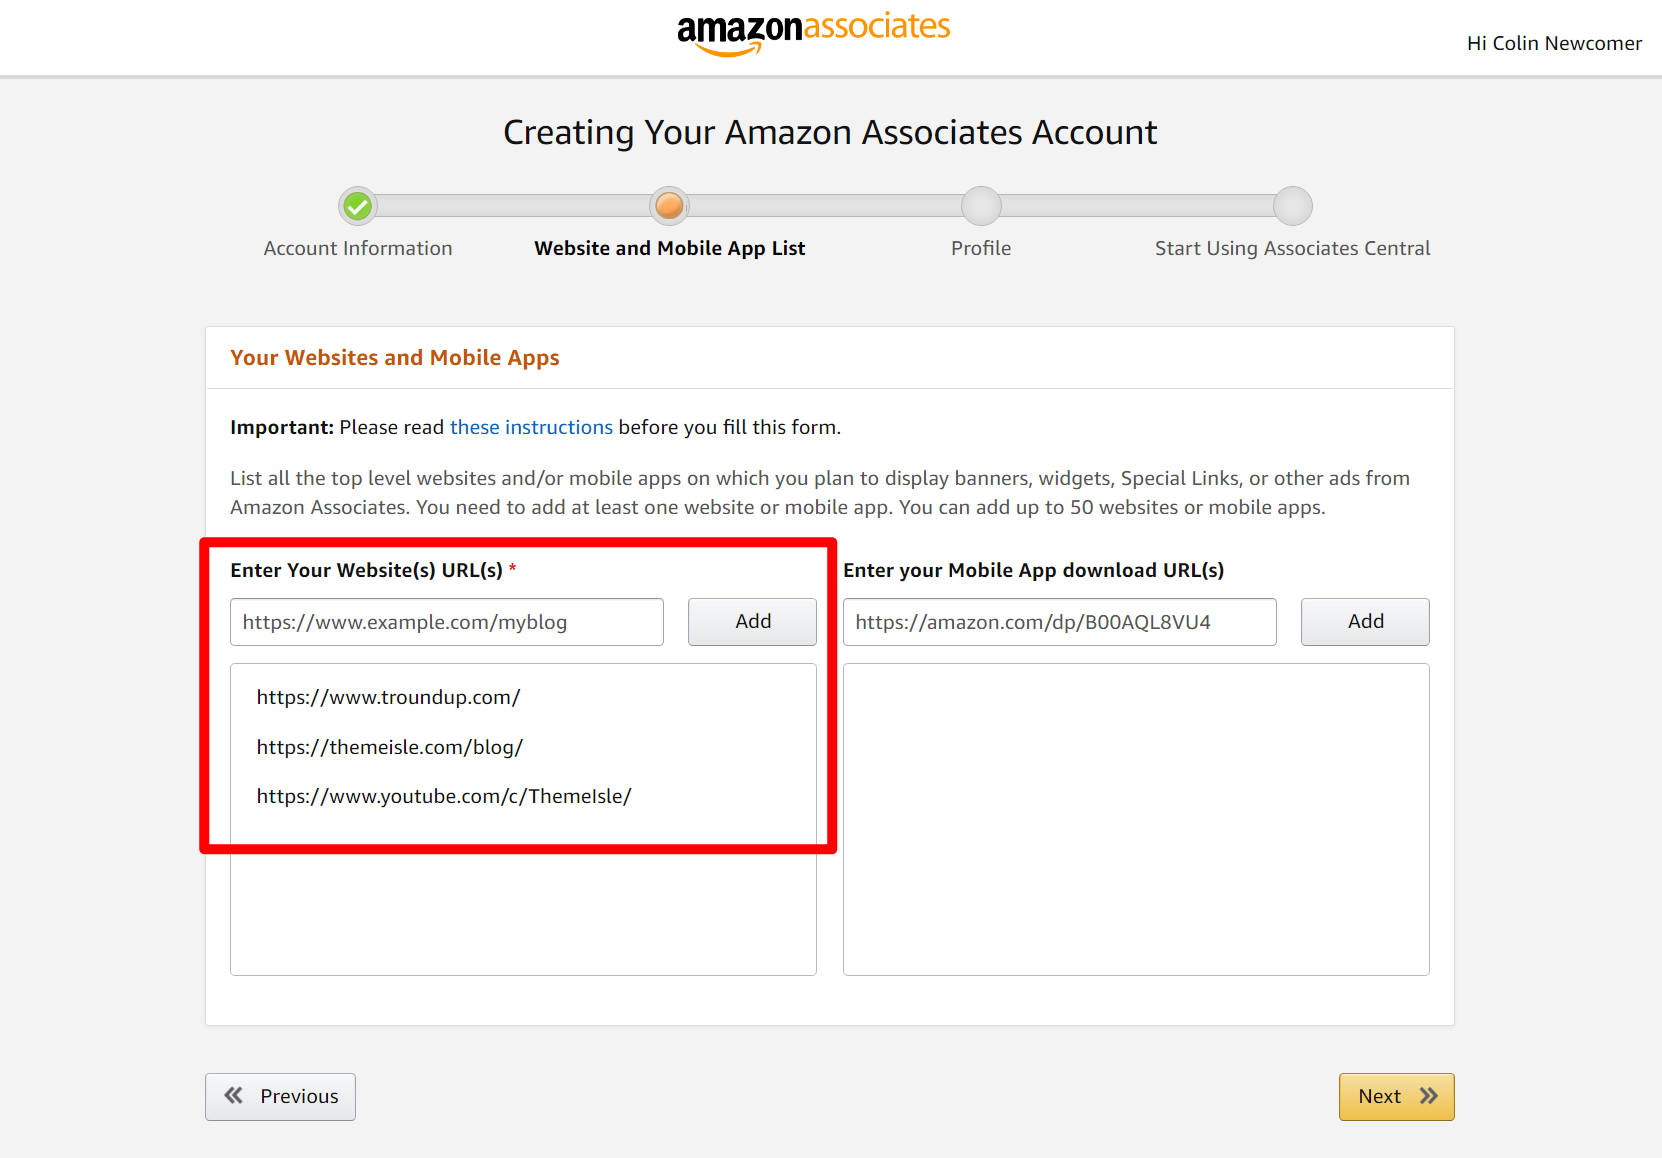 Add the websites where you'll promote Amazon products